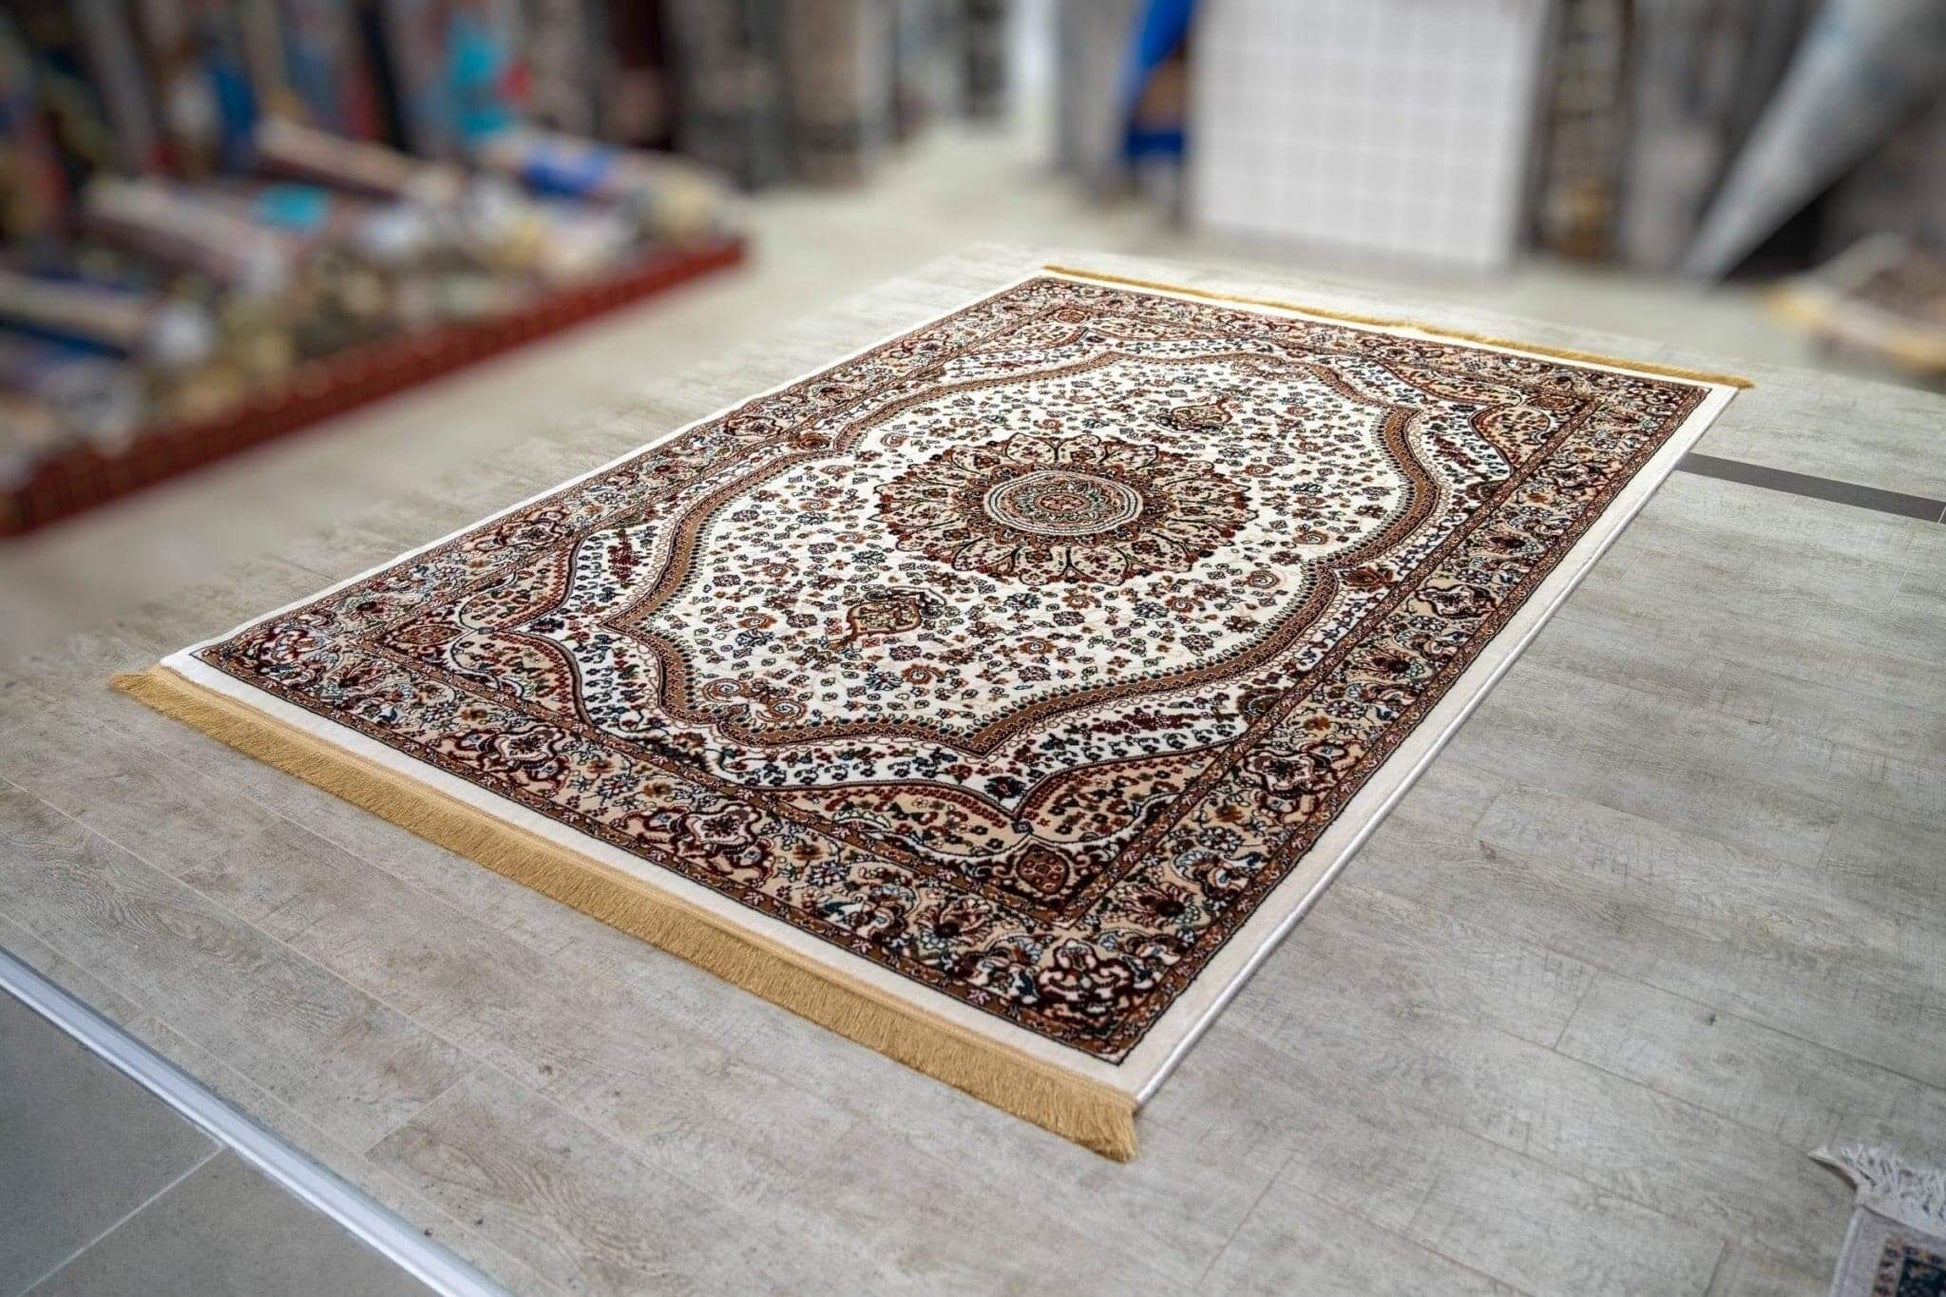 Classic Turkish Rugs. Made in Turkey, these affordable rugs bring authentic charm to any space. Soft and luxurious, blending tradition with modernity.